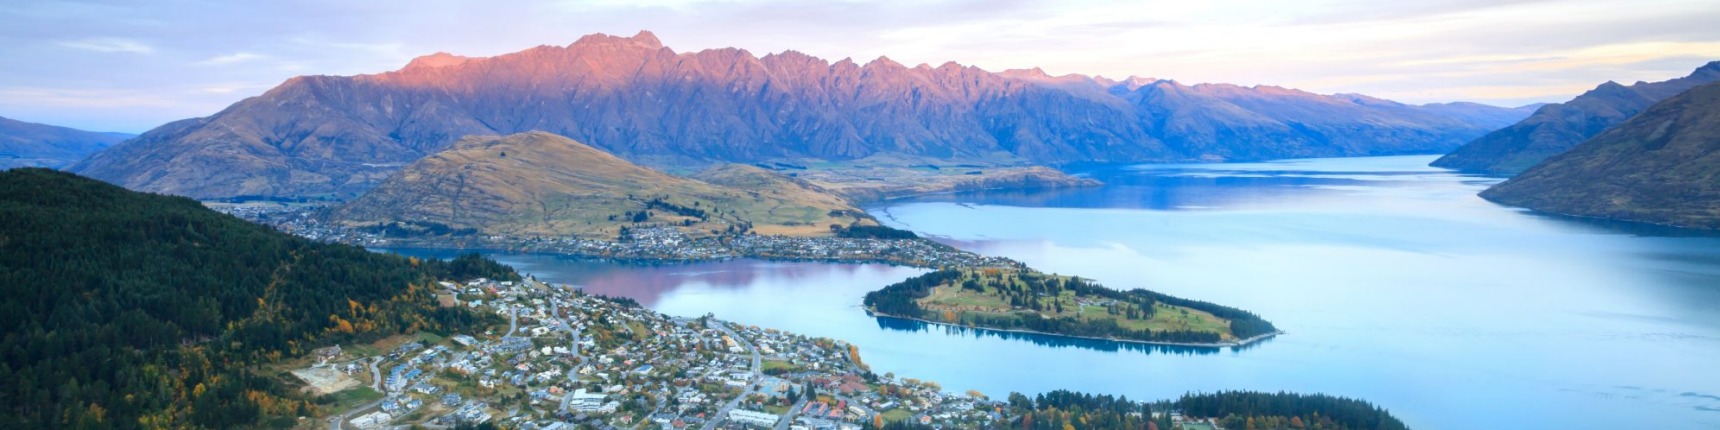 Queenstown, New Zealand: Stunningly beautiful, this Kiwi town is an adventure Mecca.